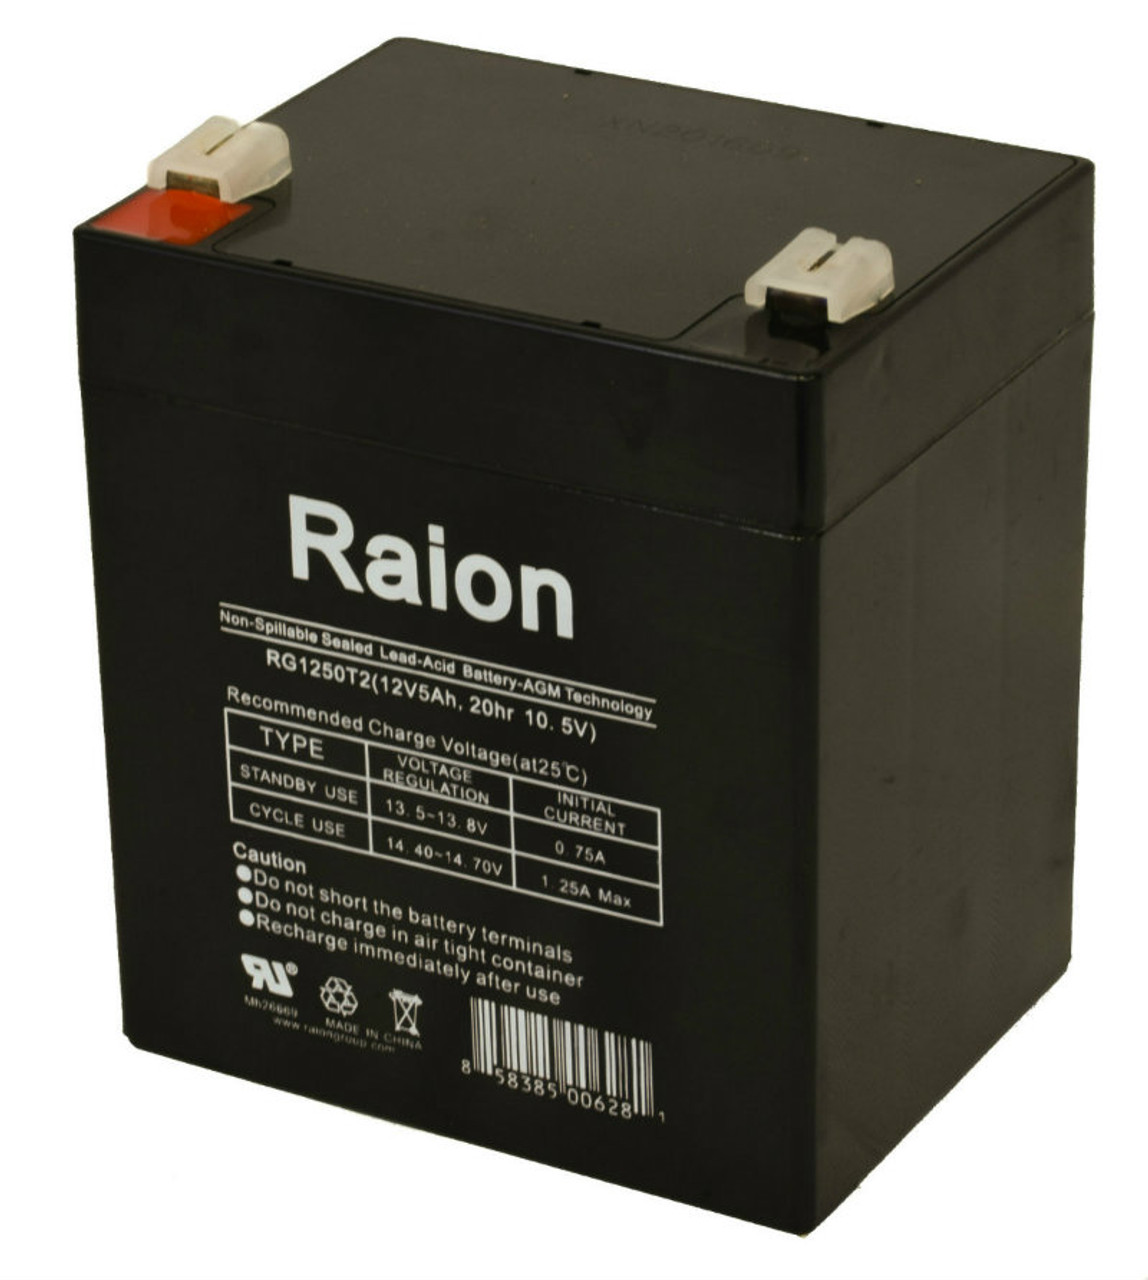 Raion Power RG1250T1 Replacement Battery for GF Health Products Lumex LF1050 Patient Lift